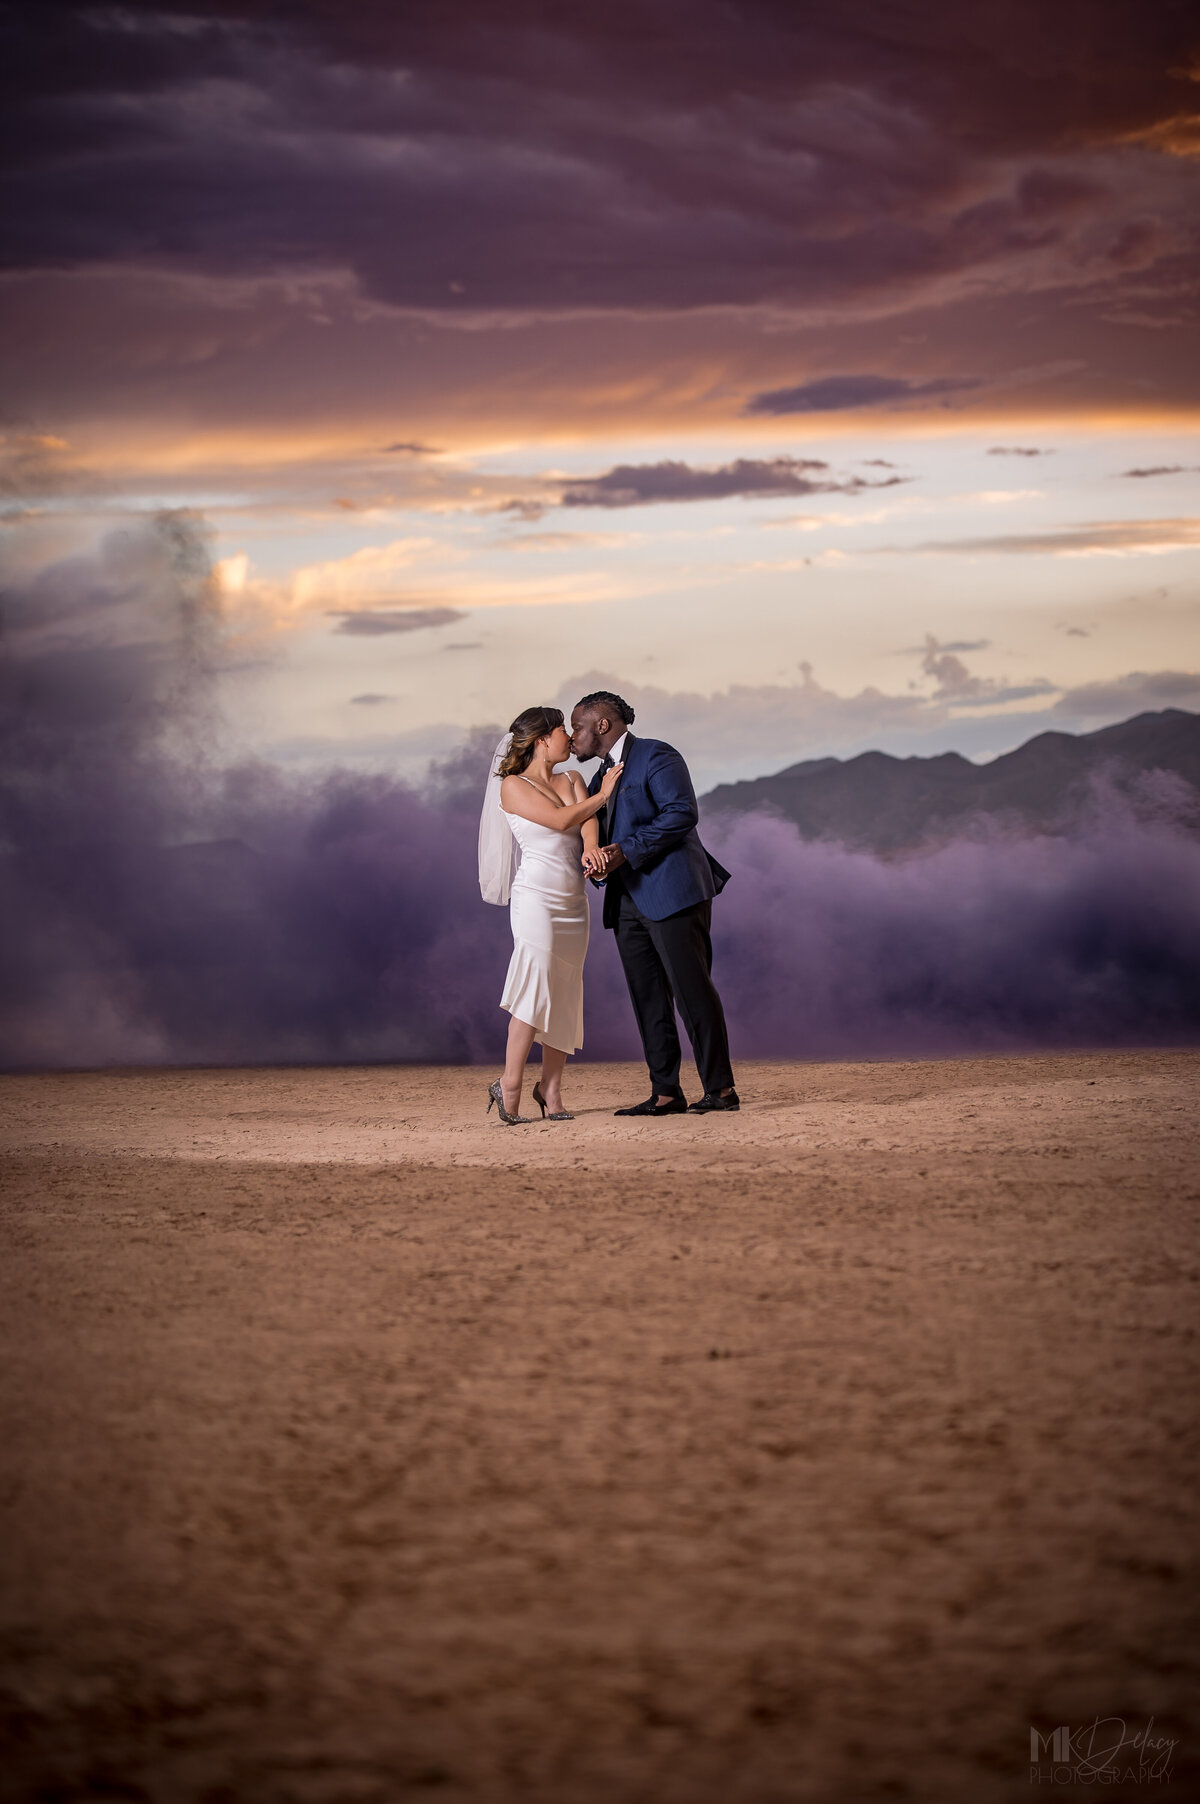 Bride kisses her groom in the desert with purple smoke bomb in the wind las vegas elopement on the dry lake bed  at golden hour groom in blue suit jacket and black  pants  las vegas elopement eloping in vegas  las vegas wedding photographers las vegas wedding photography mk delacy photography